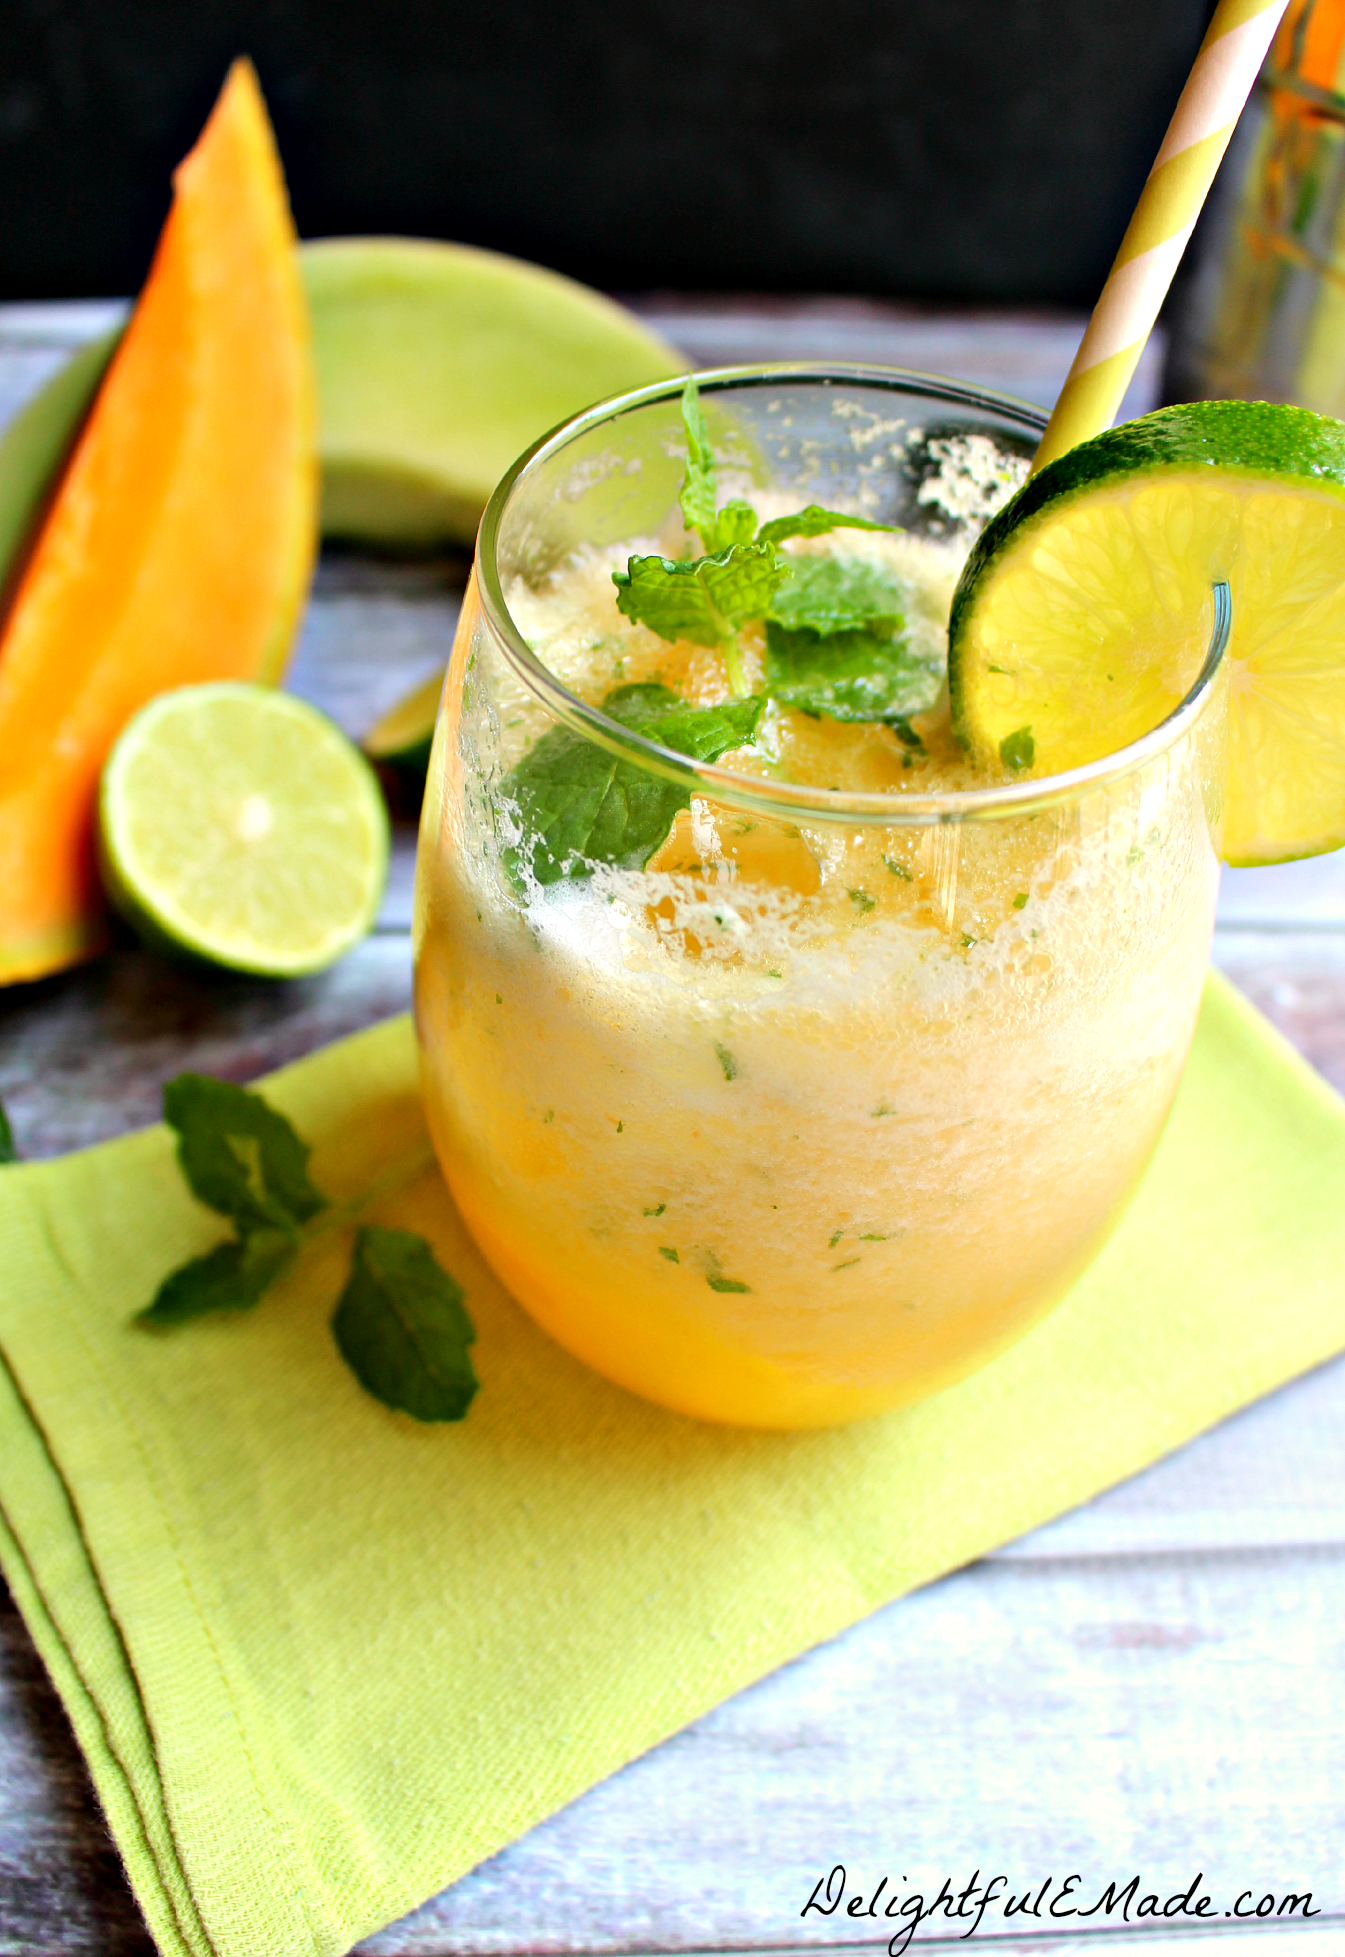 Melon and Mint Mojito by DelightfulEMade.com